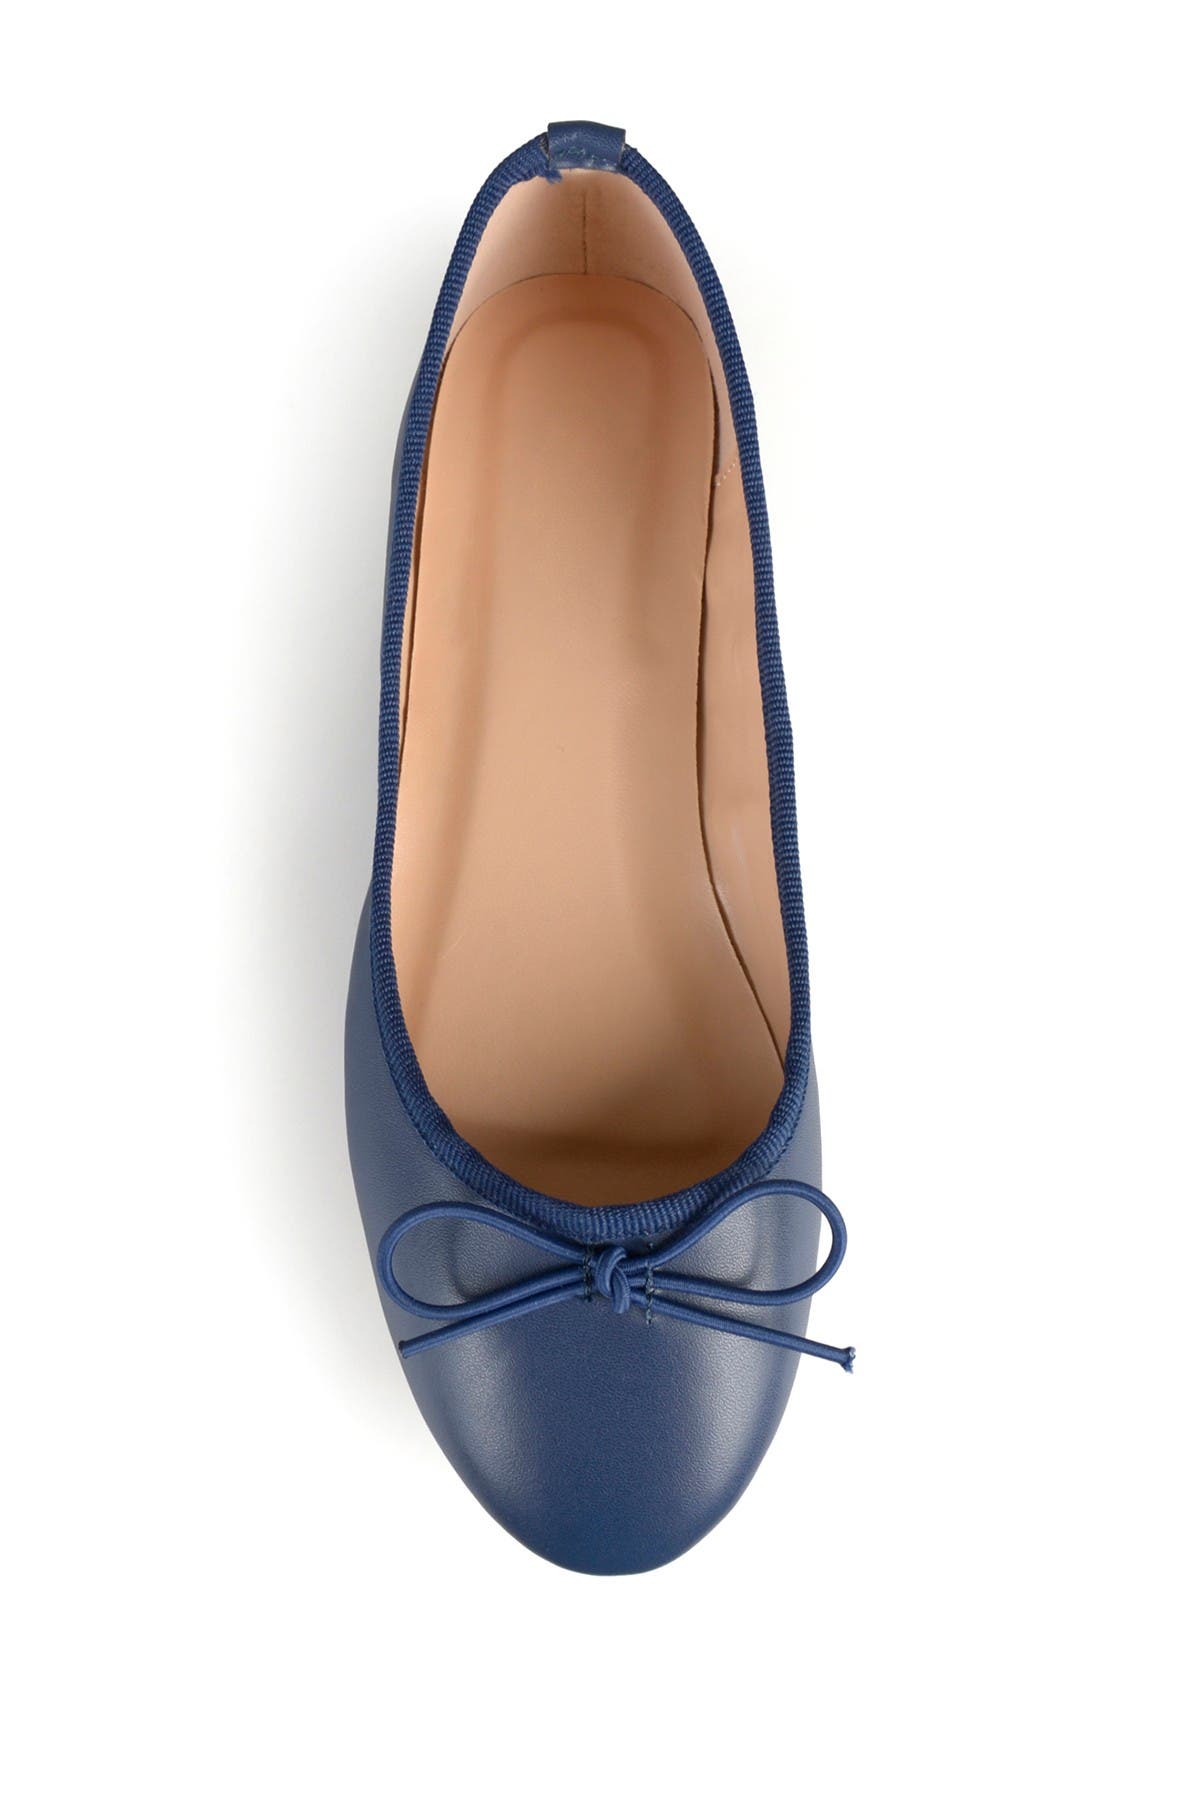 Journee Collection Vika Bow Flat In Navy2